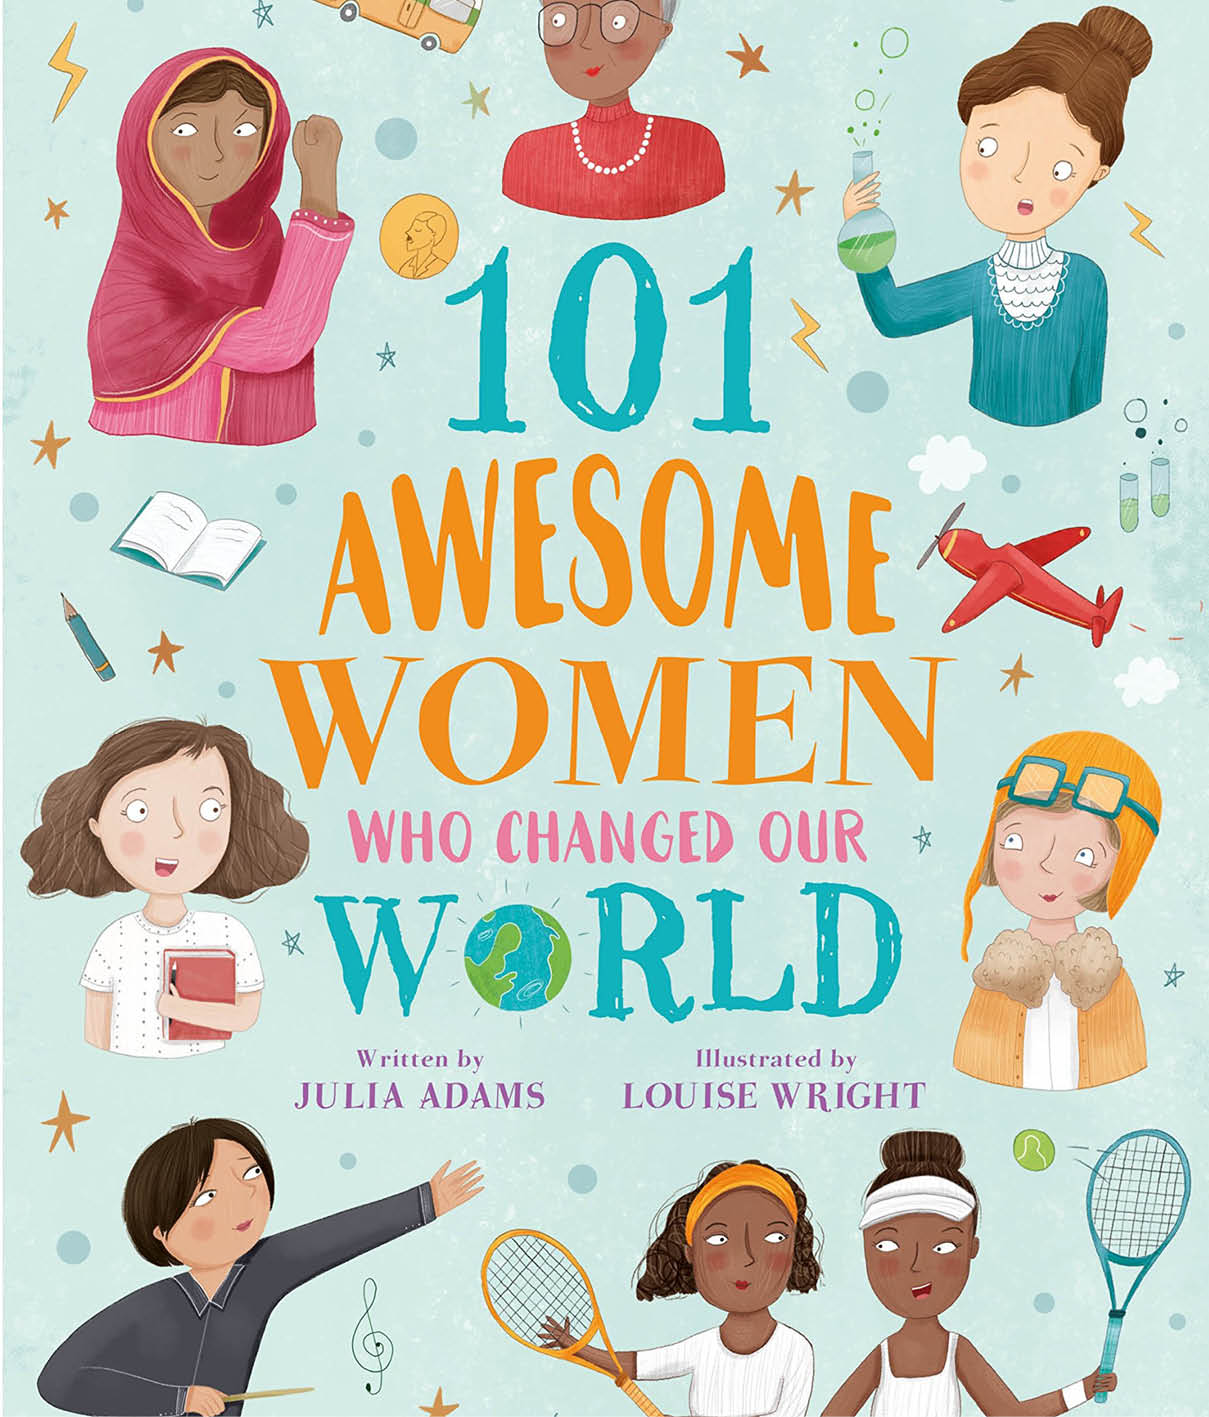 101 Awesome Women Who Changed Our World by Julia Adams